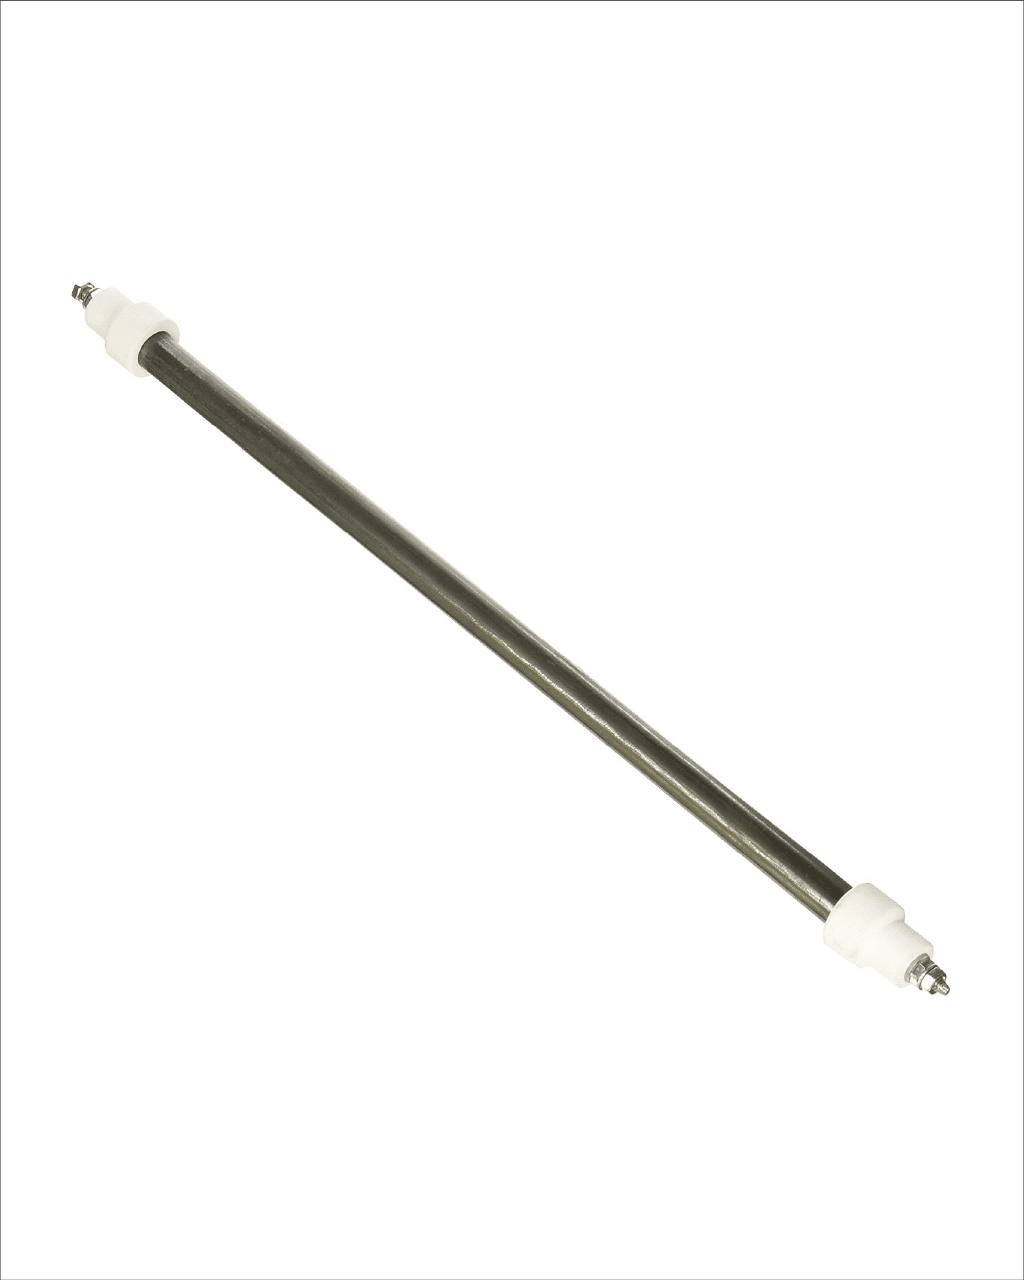 Heating Element Replacement, Replacement Heat Bar 120V